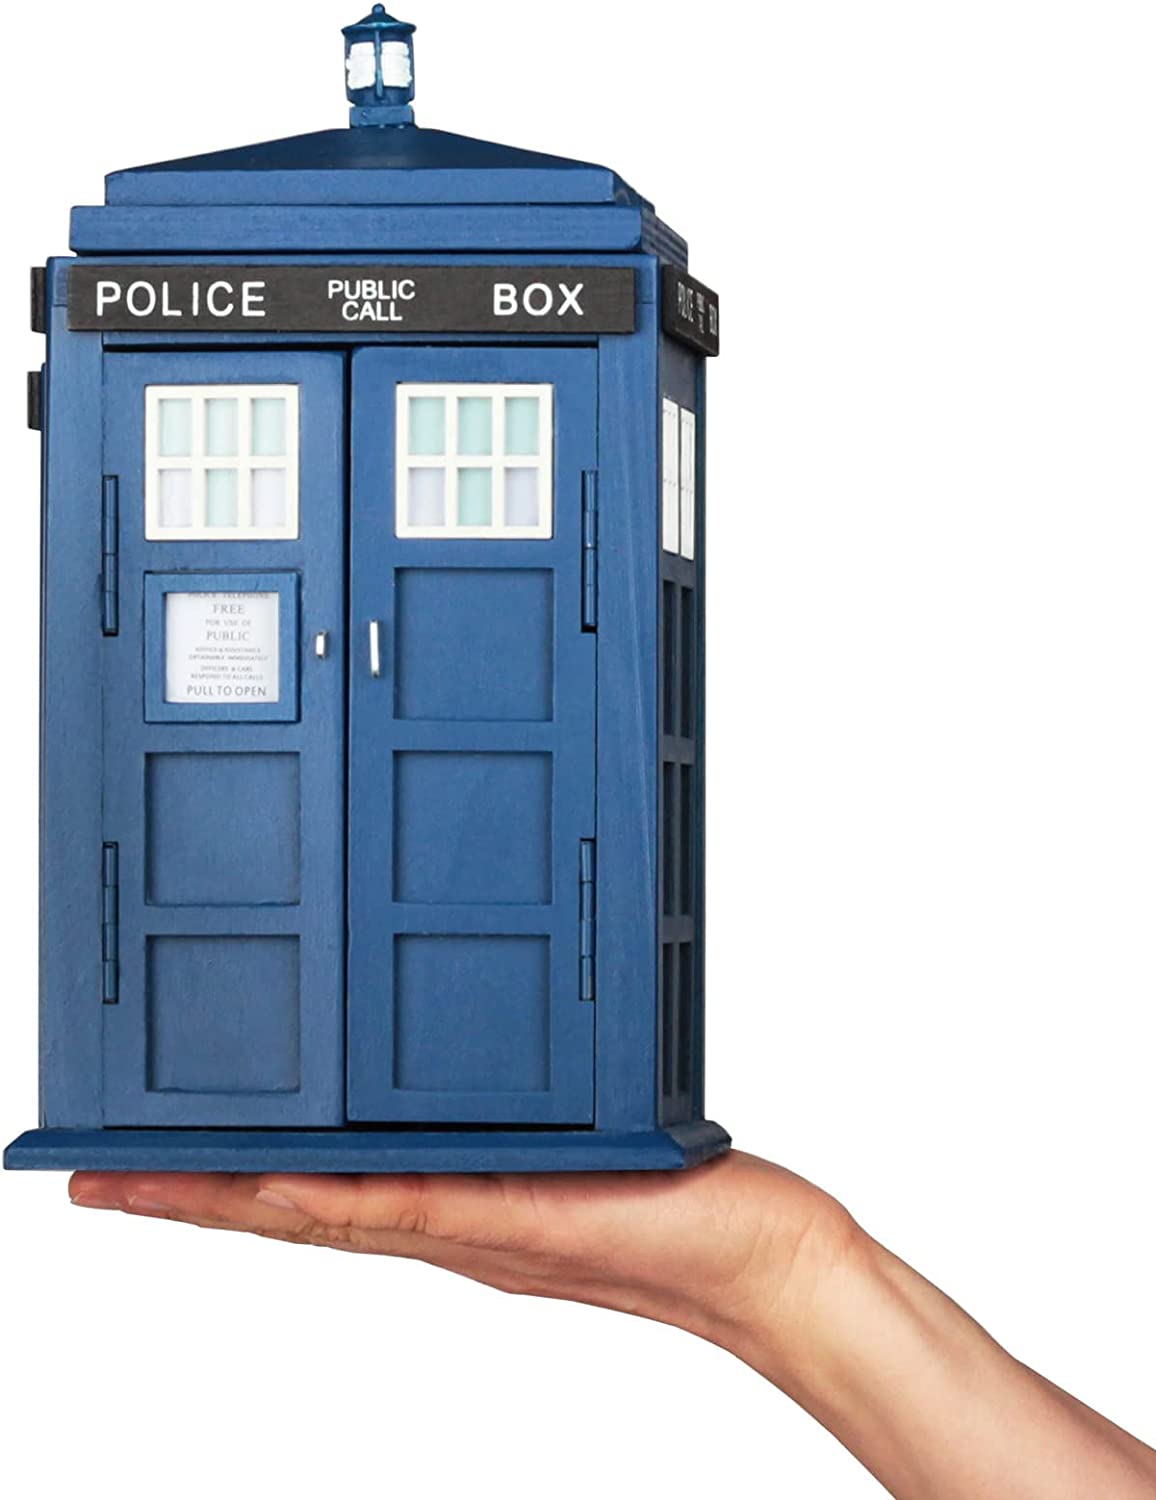 A storage box shaped like the Tardis sitting on the palm of a persons hand.